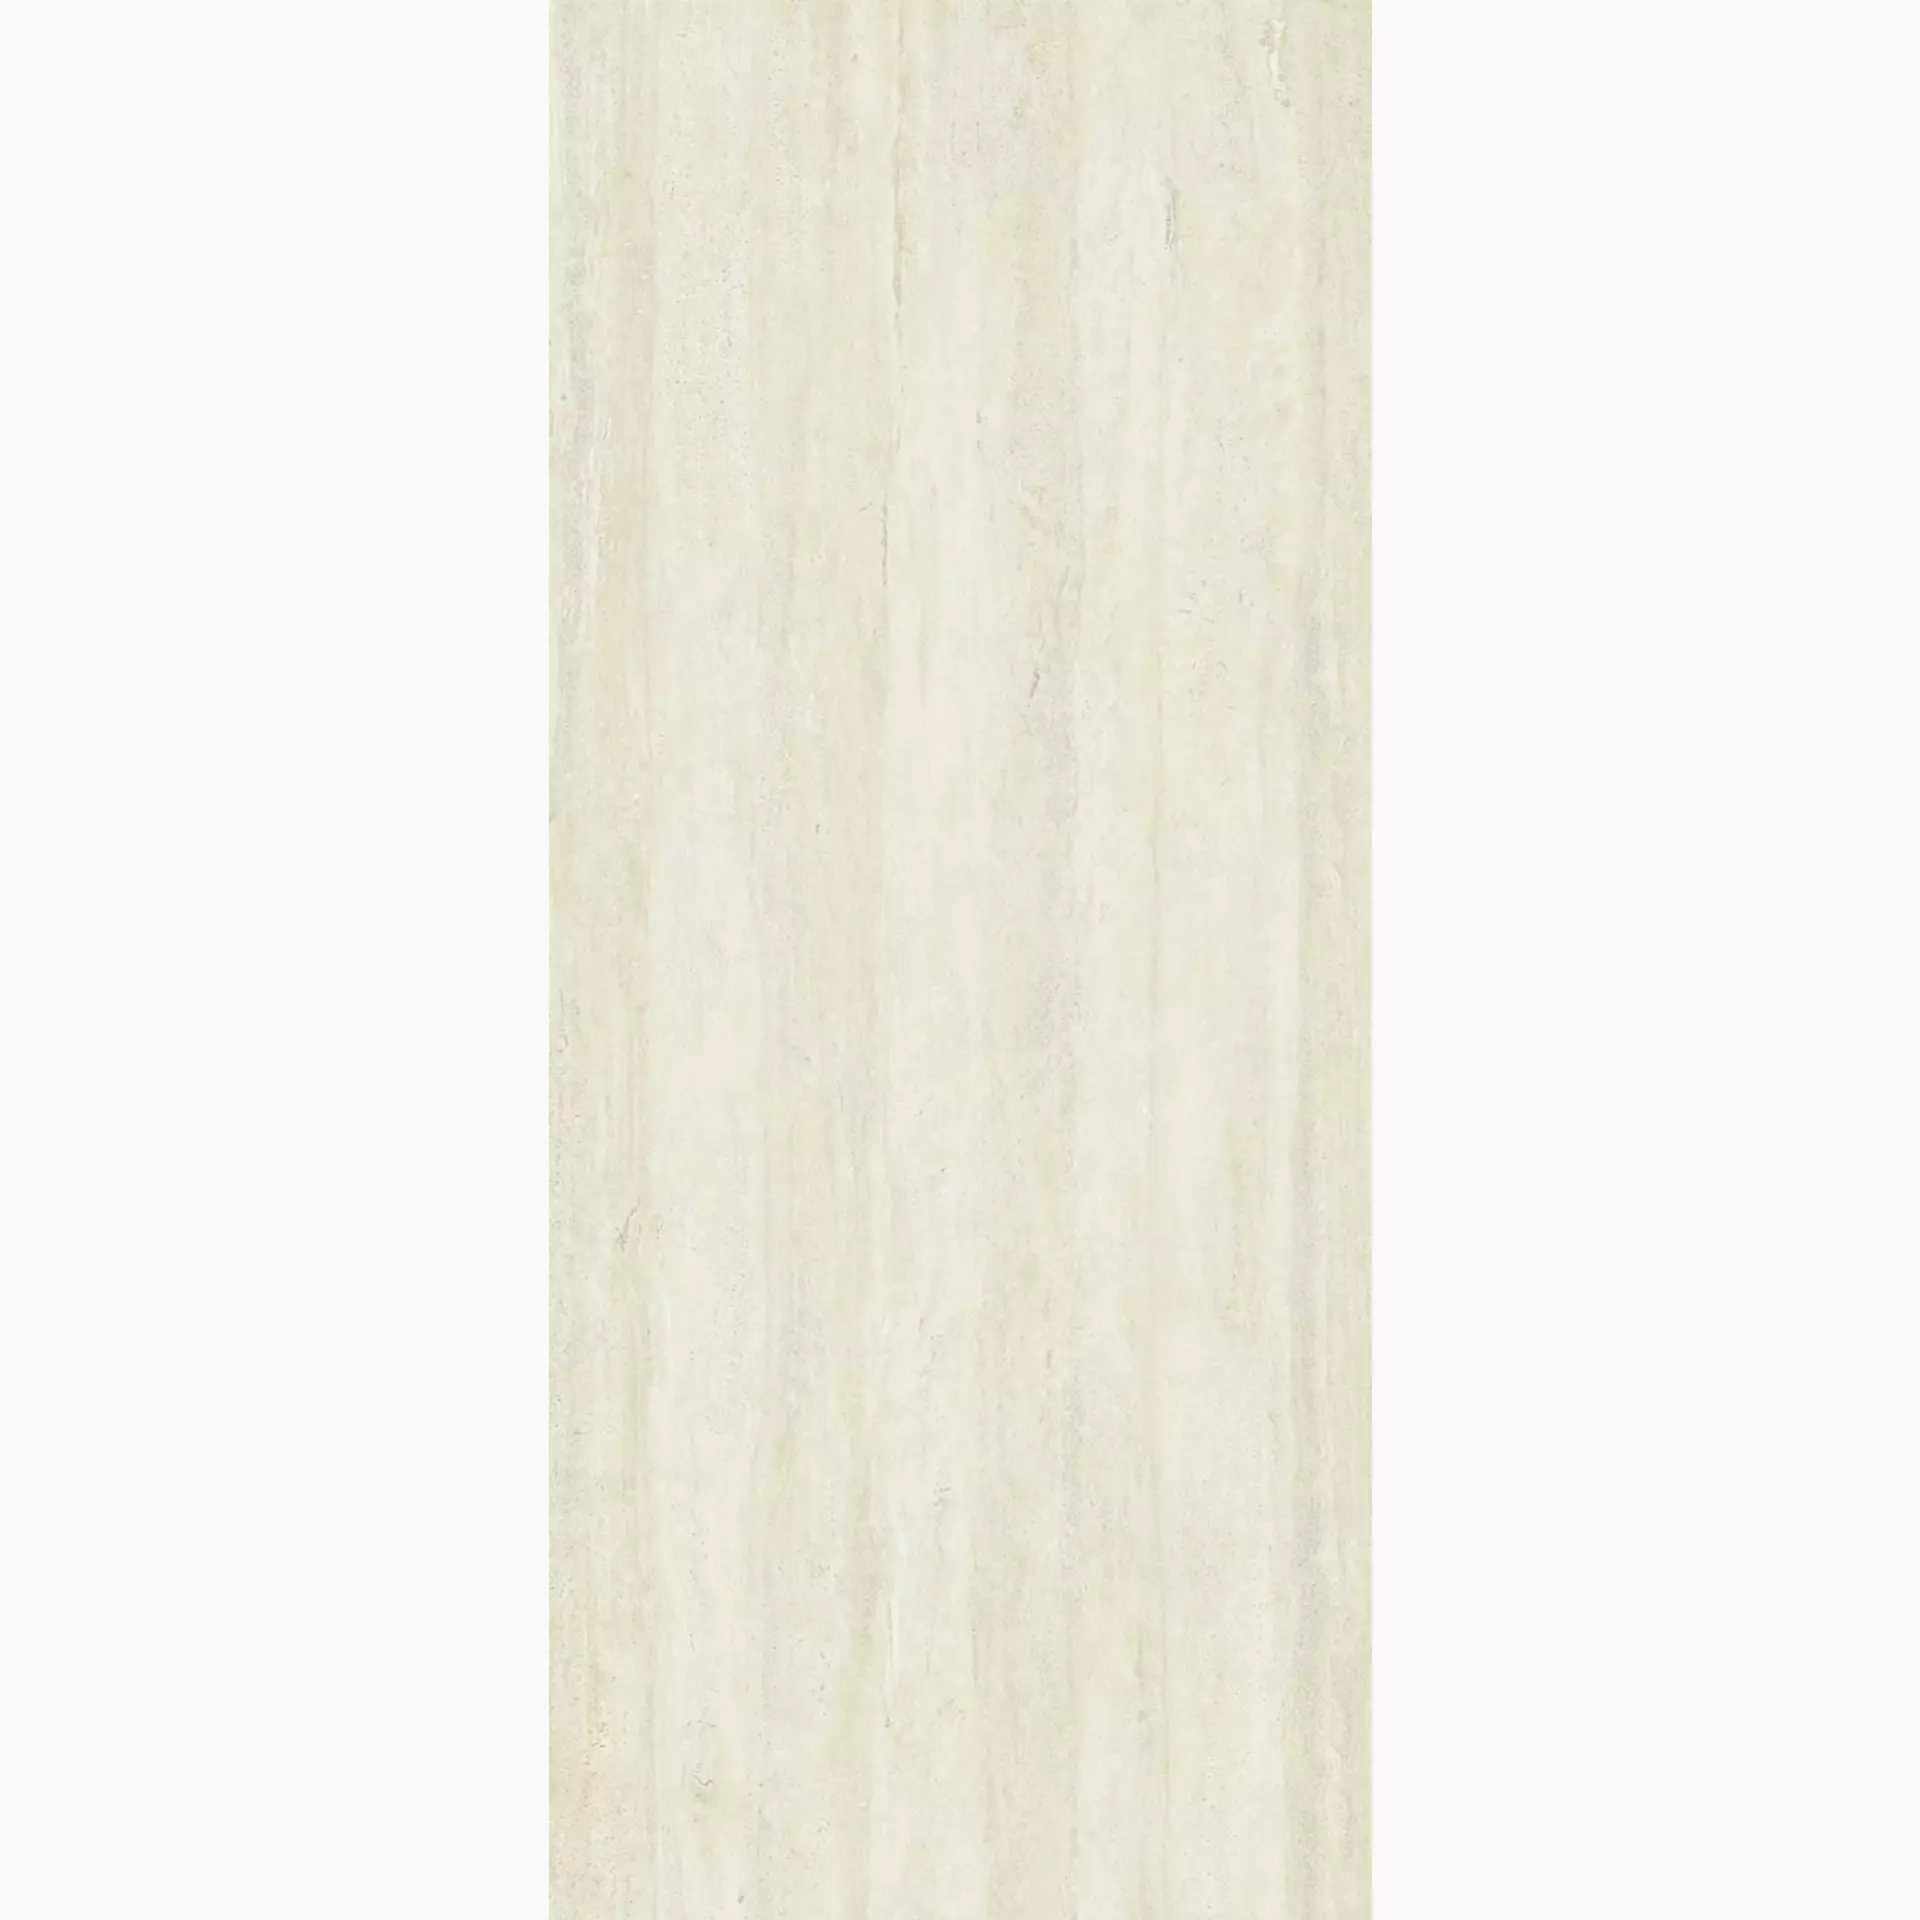 Coem Wide Gres Vein White Naturale Decor Touch 0TV281R 120x280cm rectified 6mm